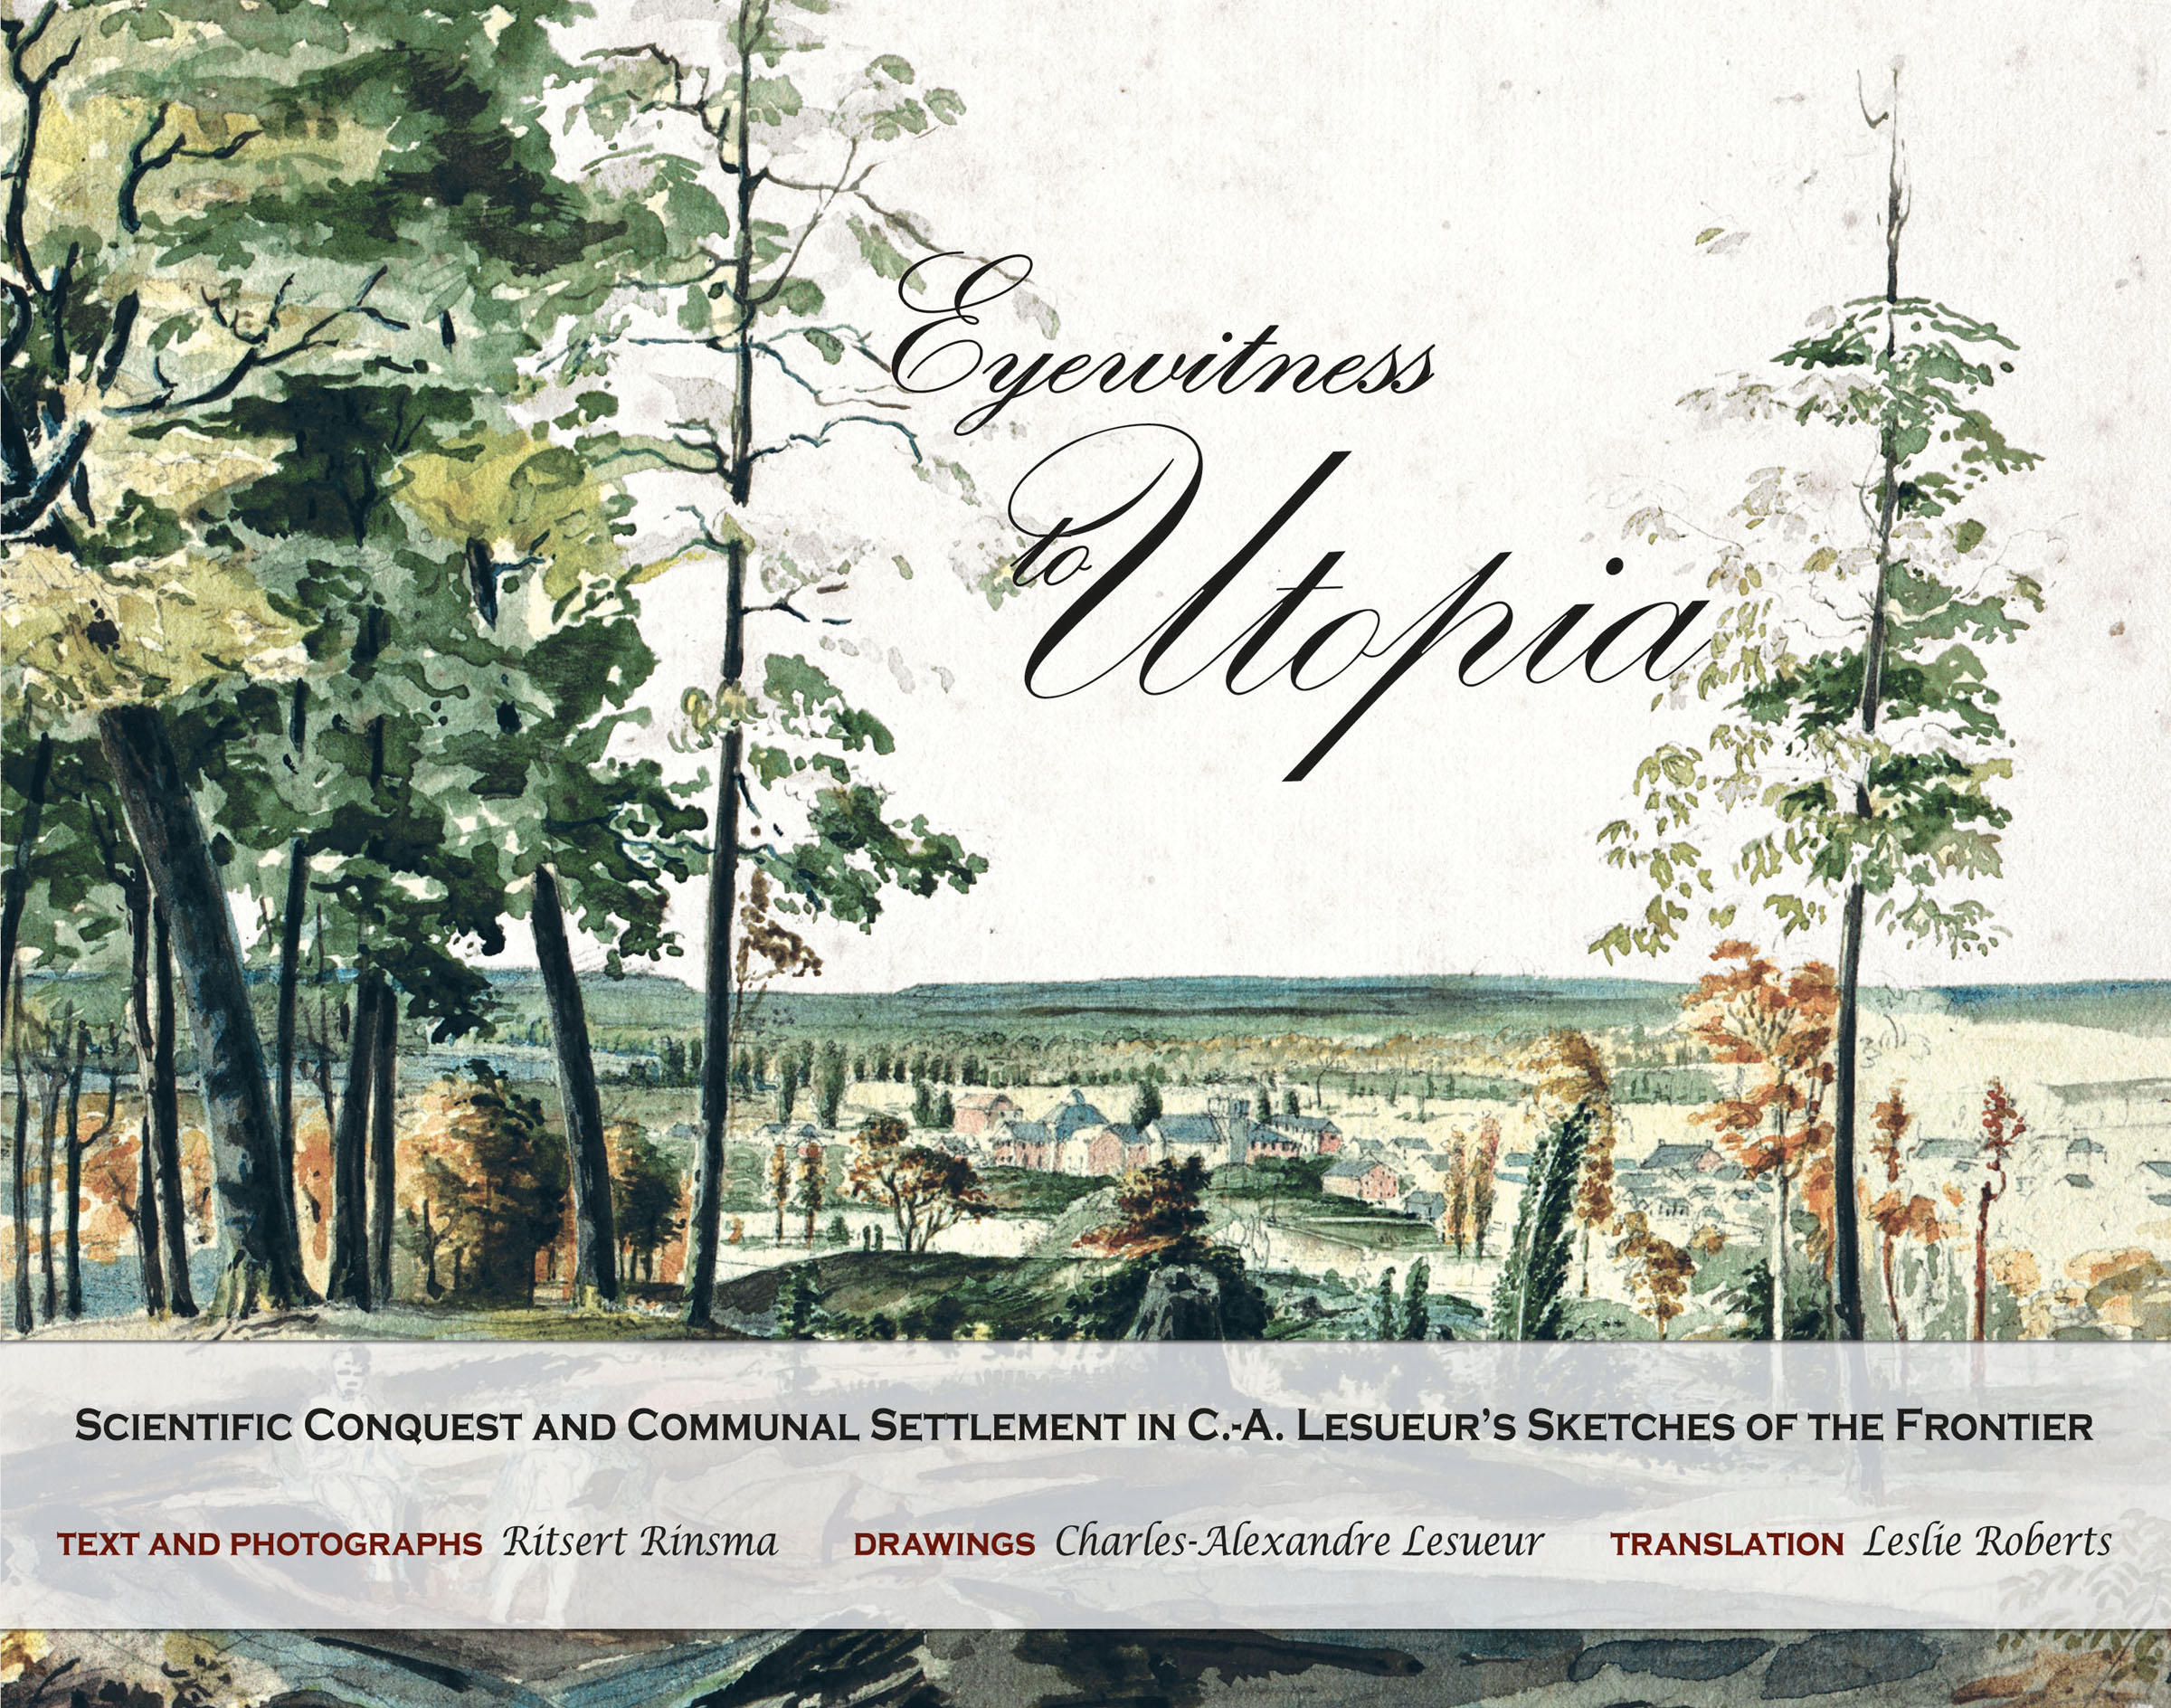 Cover of the book <em>Eyewitness to Utopia</em>, written by Ritsert Rinsma, and illustrated by Charles-Alexandre Lesueur, showing New Harmony, Indiana